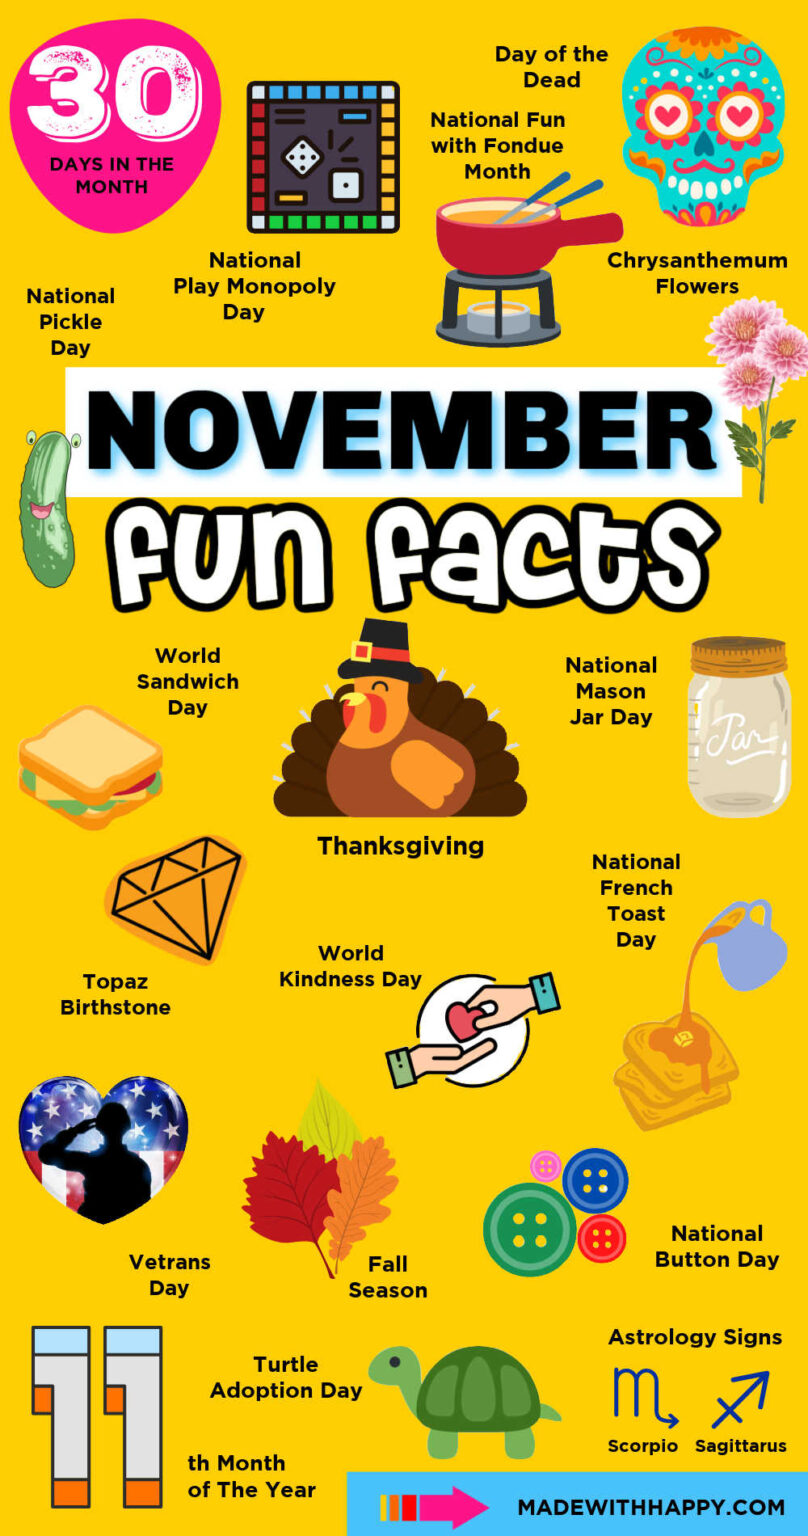 November Fun Facts Made with HAPPY